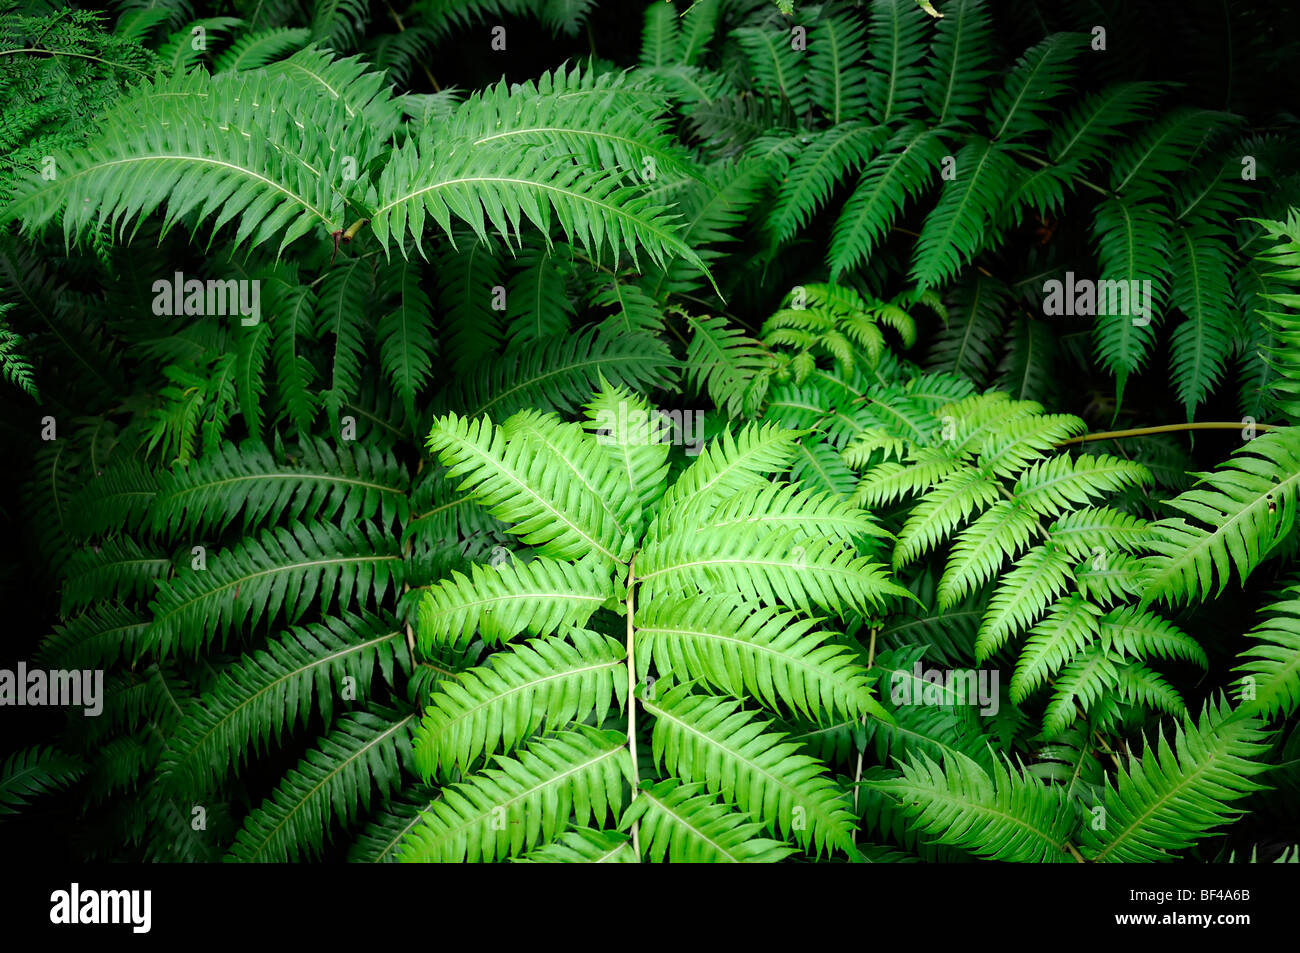 Woodwardia radicans Blechnum Blechnaceae family rooting chainfern chain fern green fronds Stock Photo